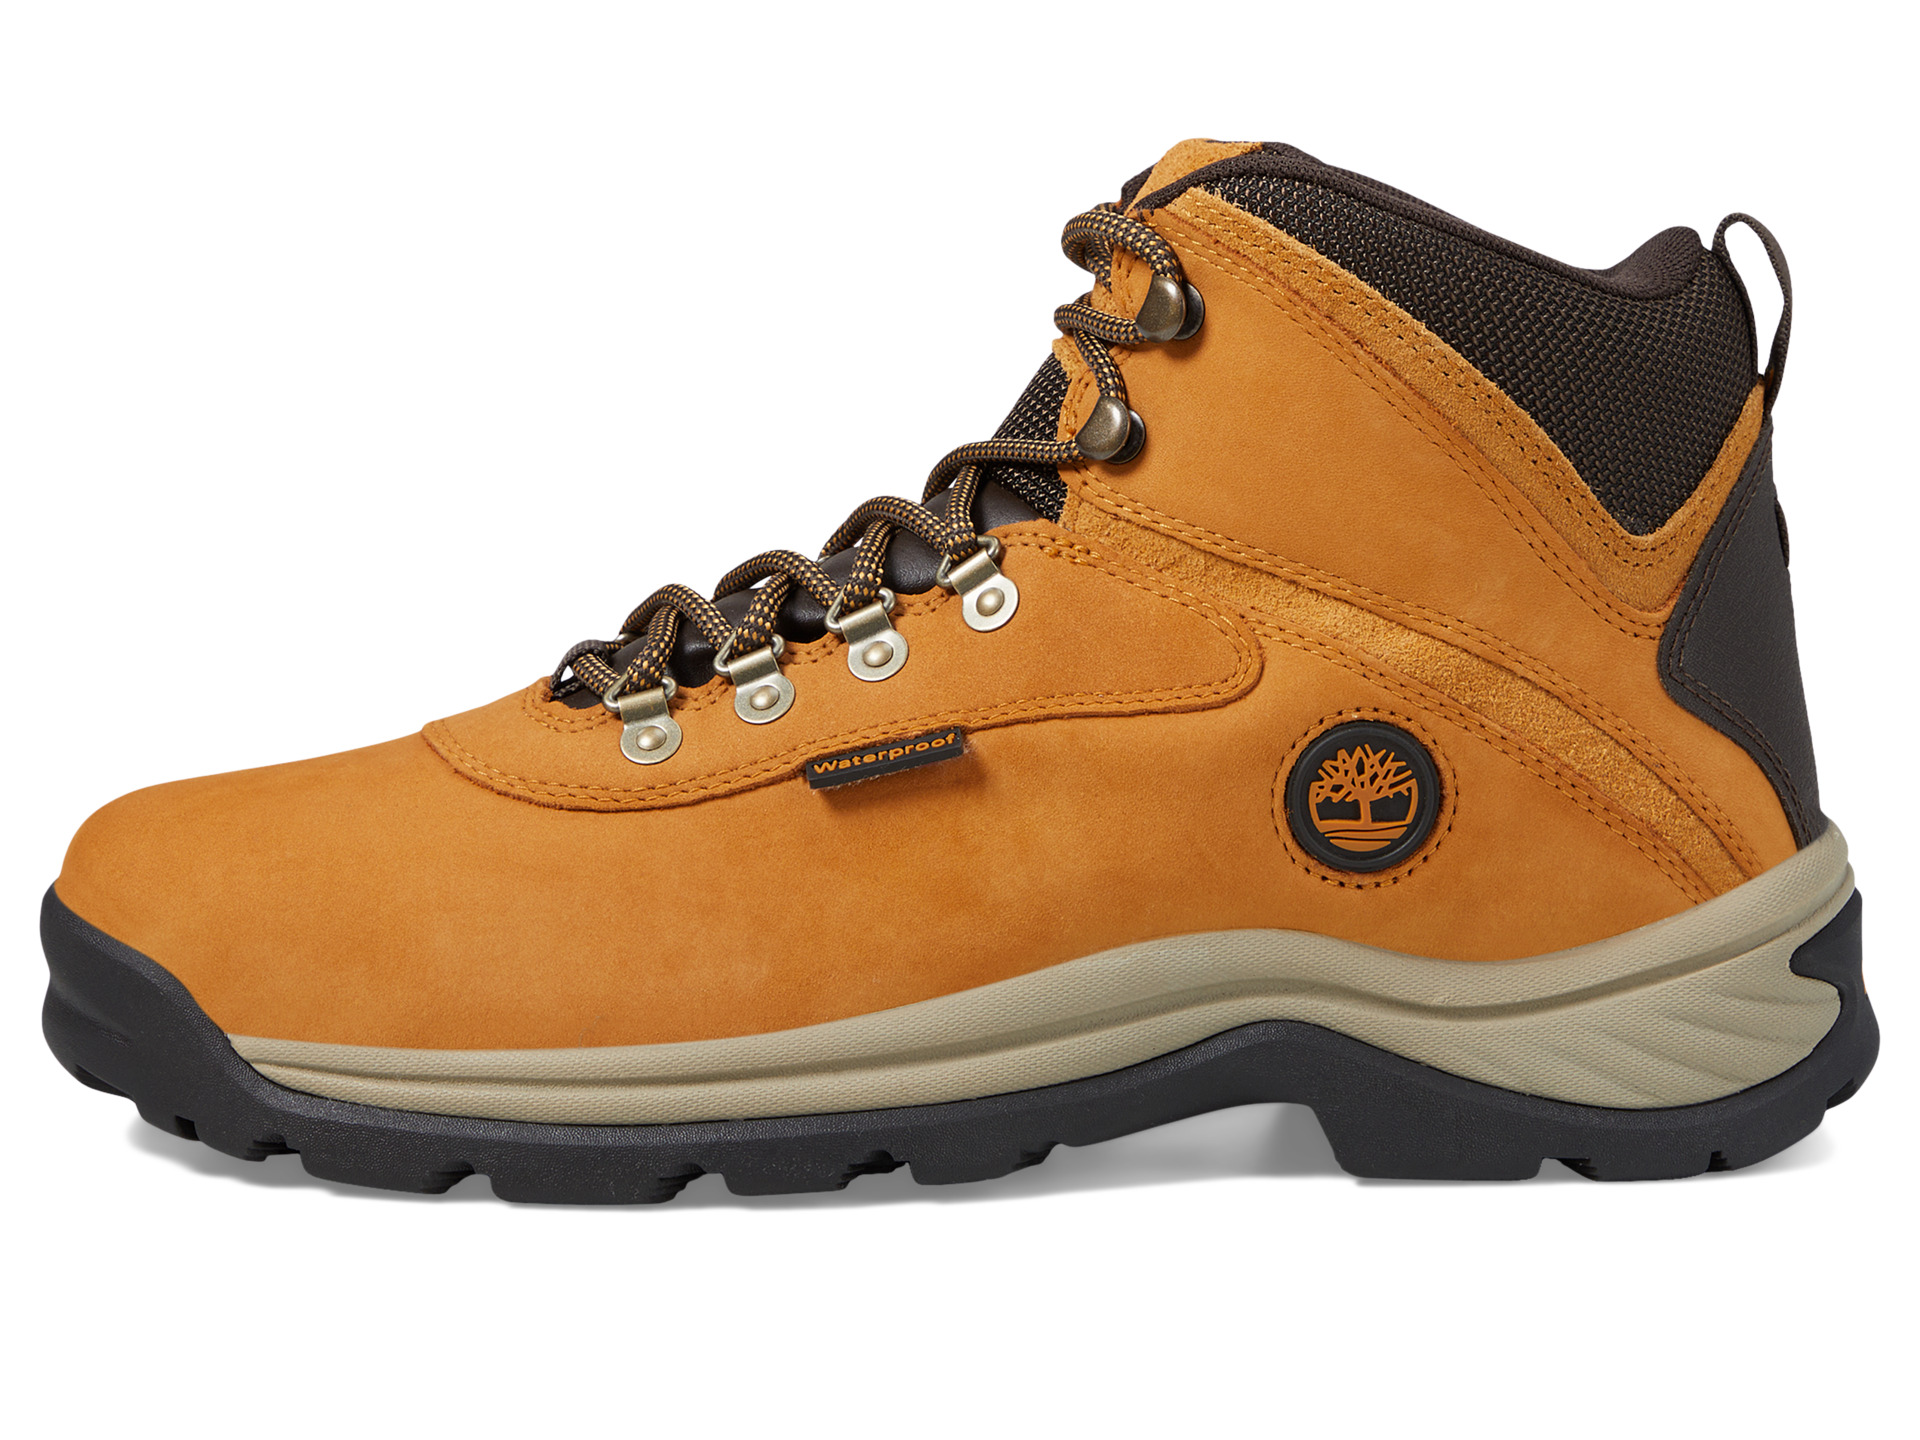 Timberland White Ledge Mid Waterproof at Zappos.com